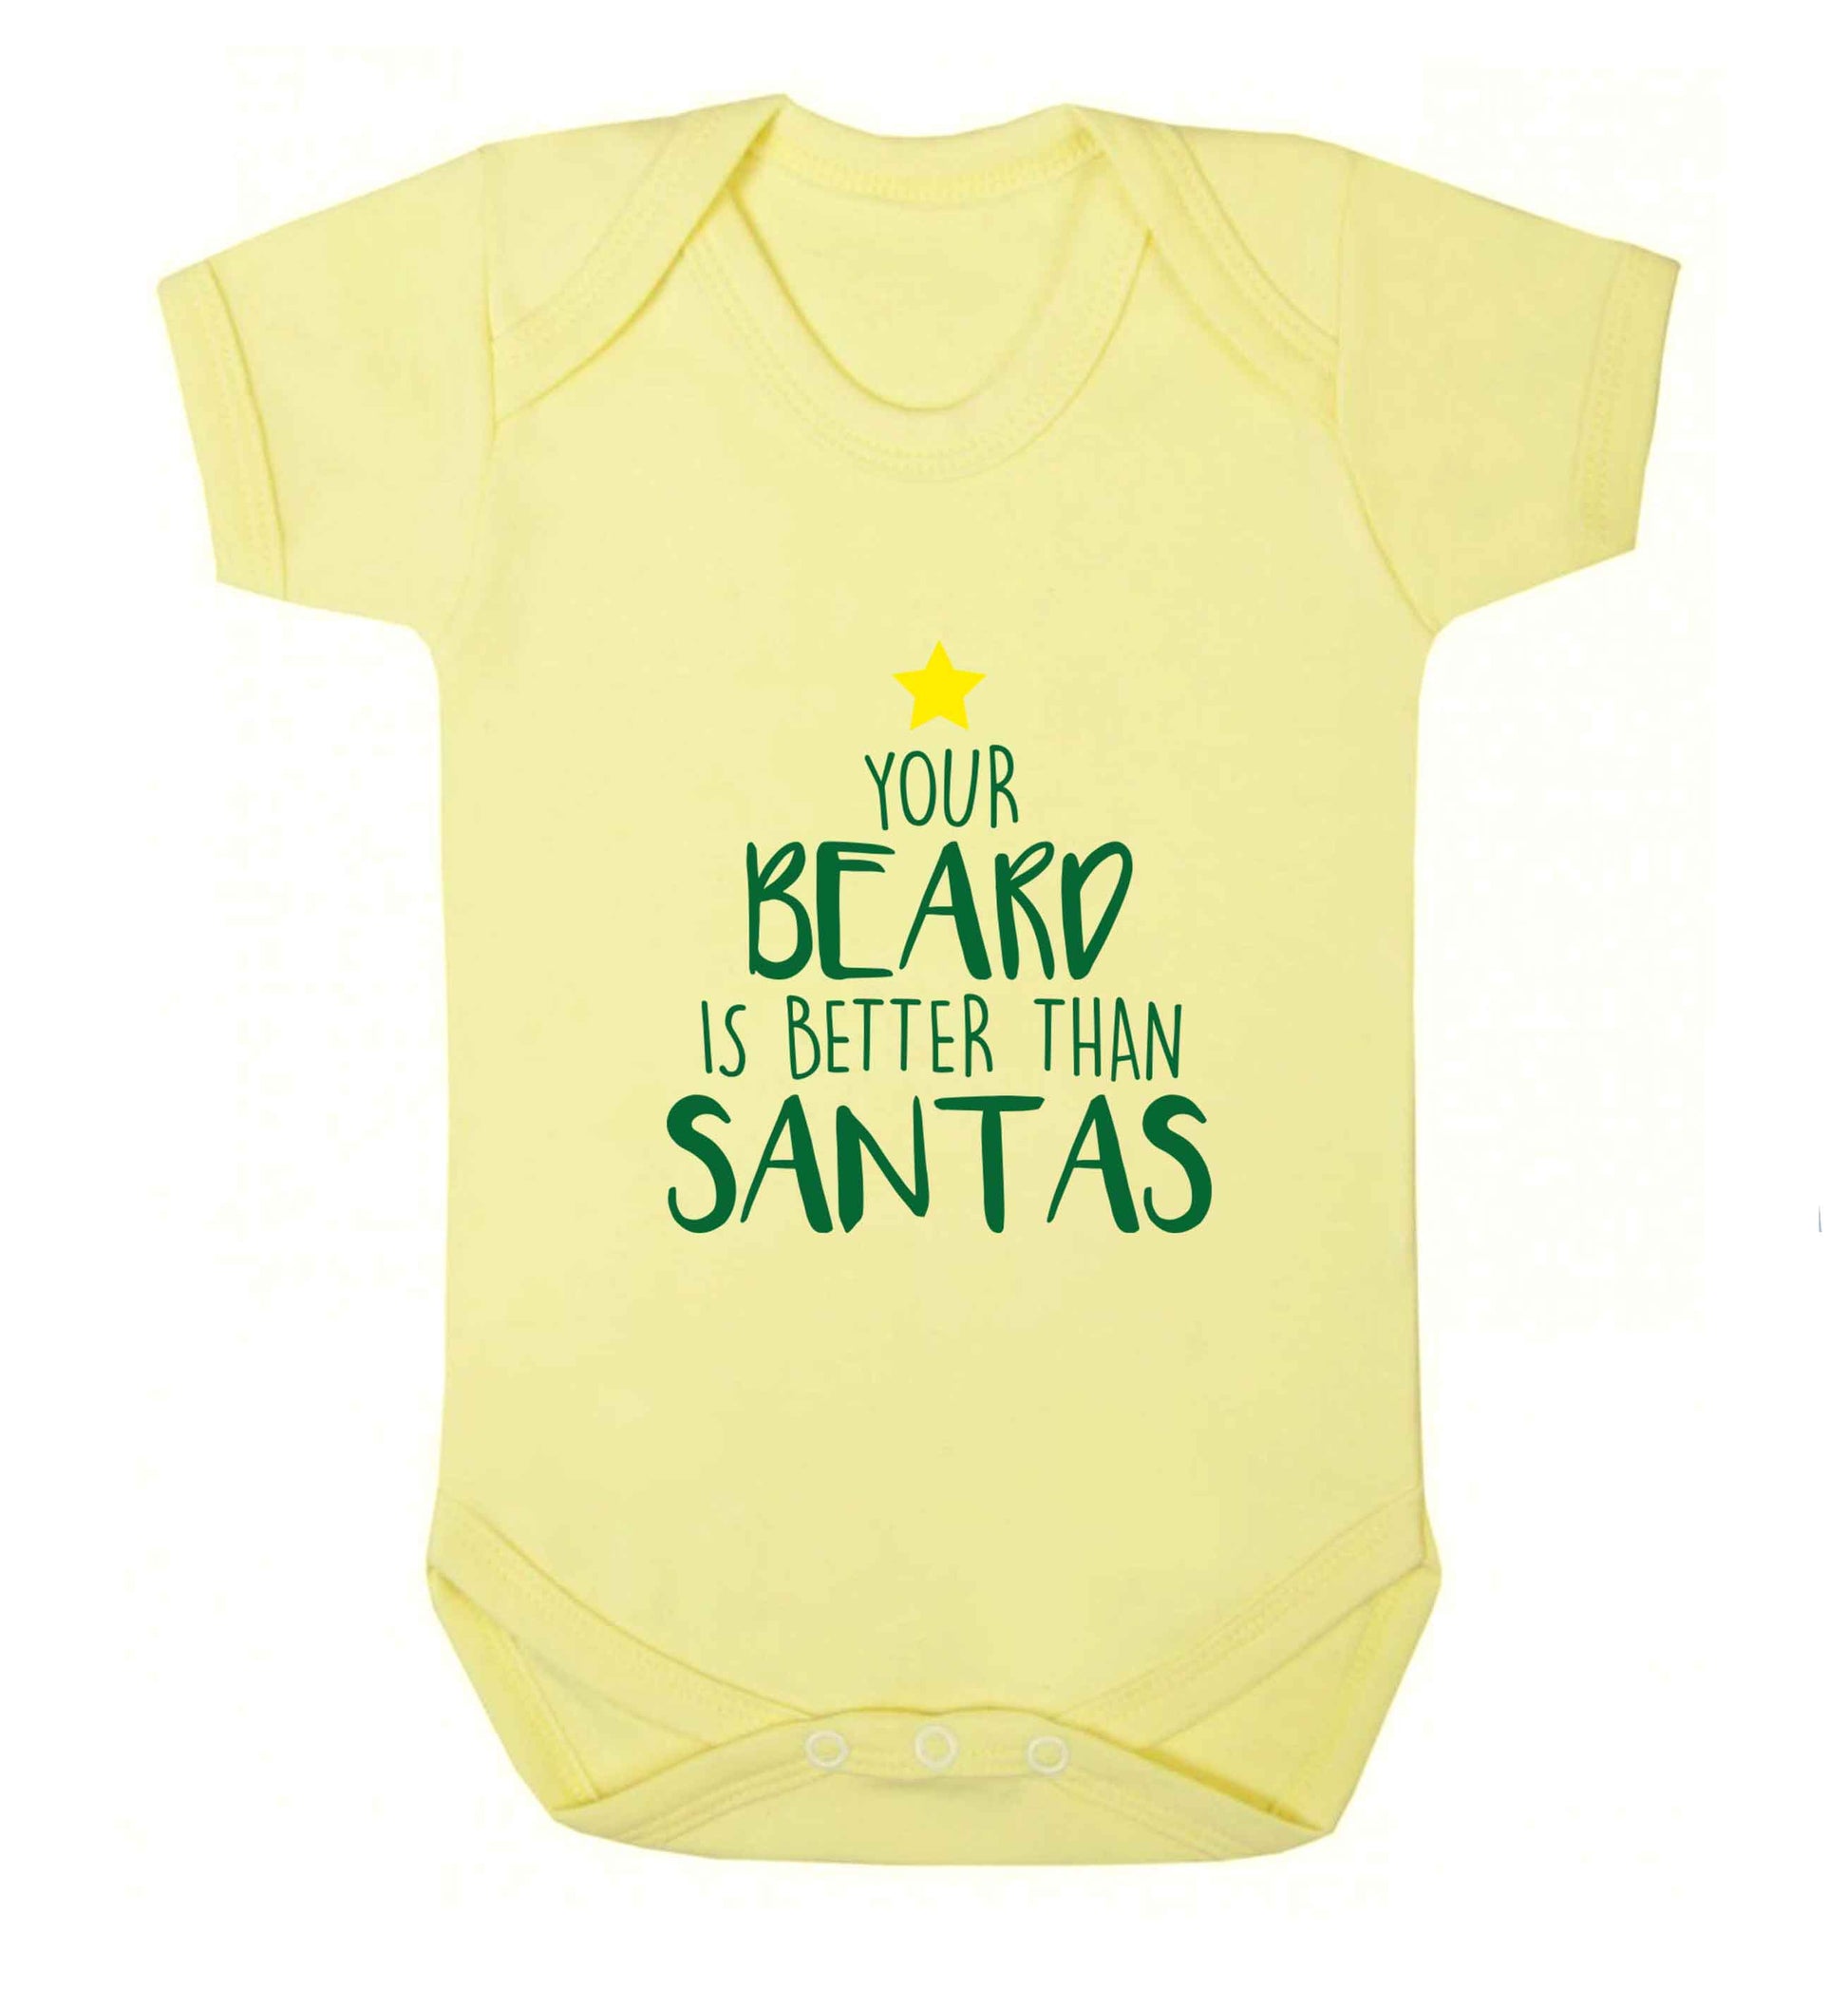 Your Beard Better than Santas baby vest pale yellow 18-24 months